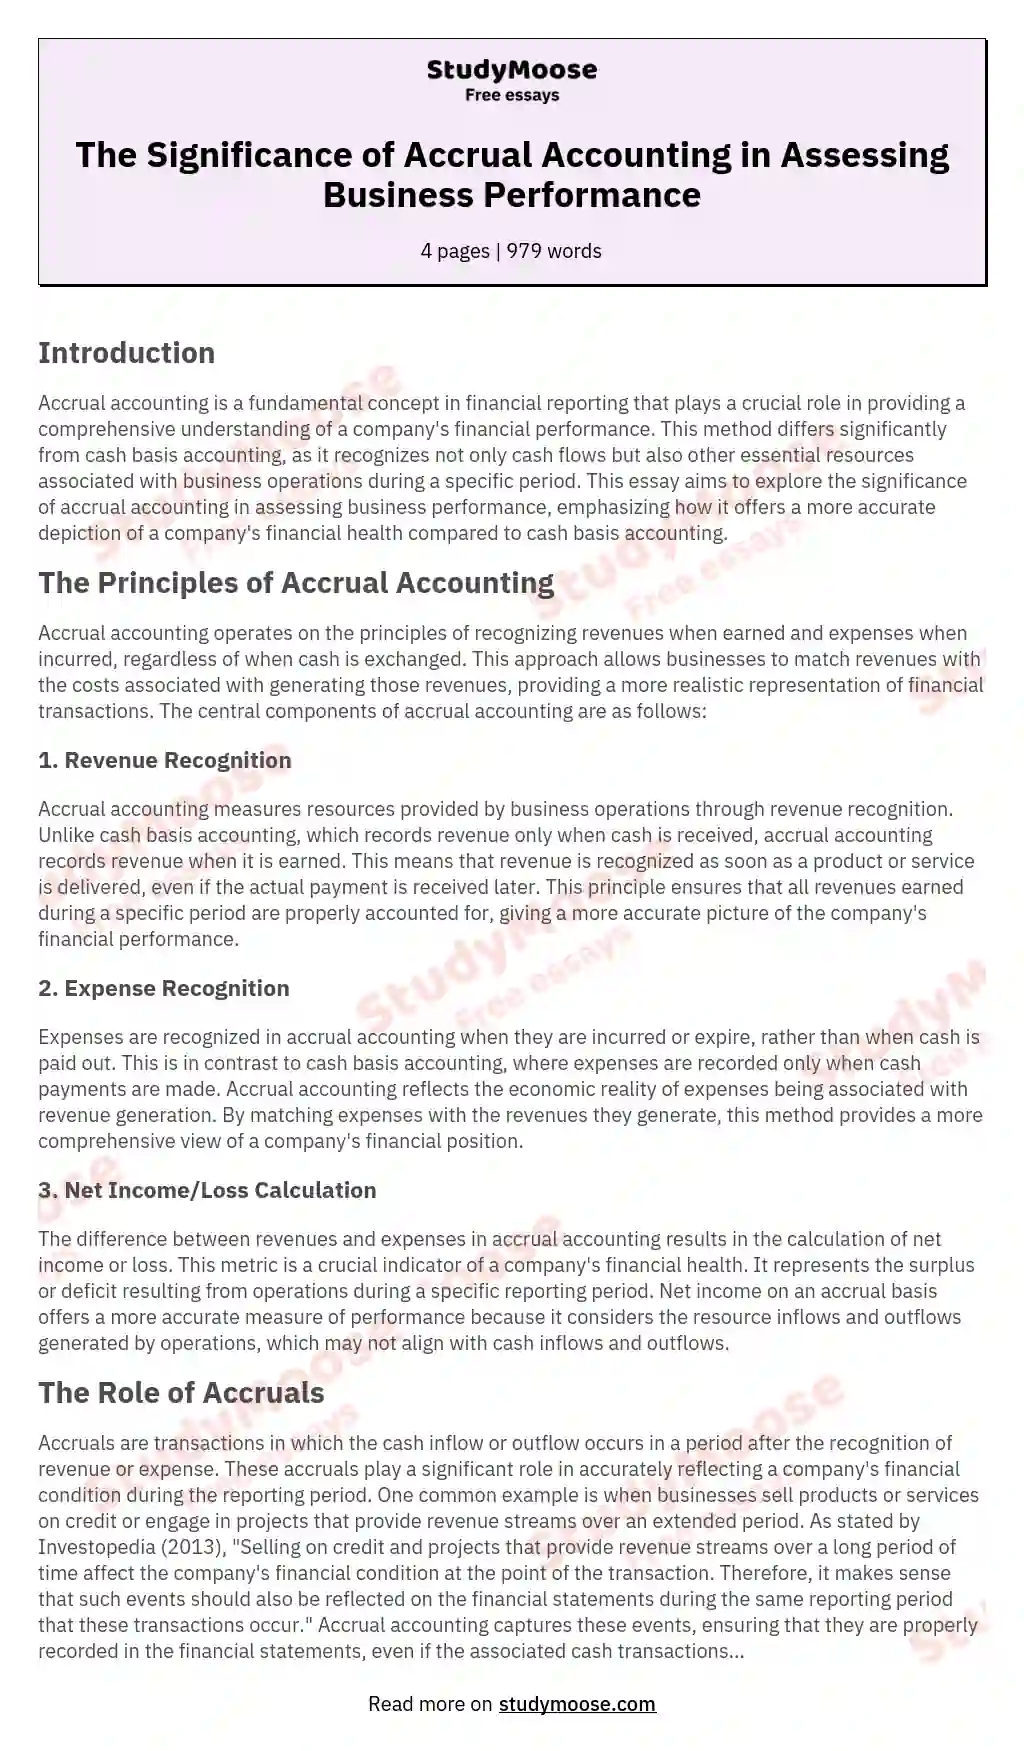 The Significance of Accrual Accounting in Assessing Business Performance essay